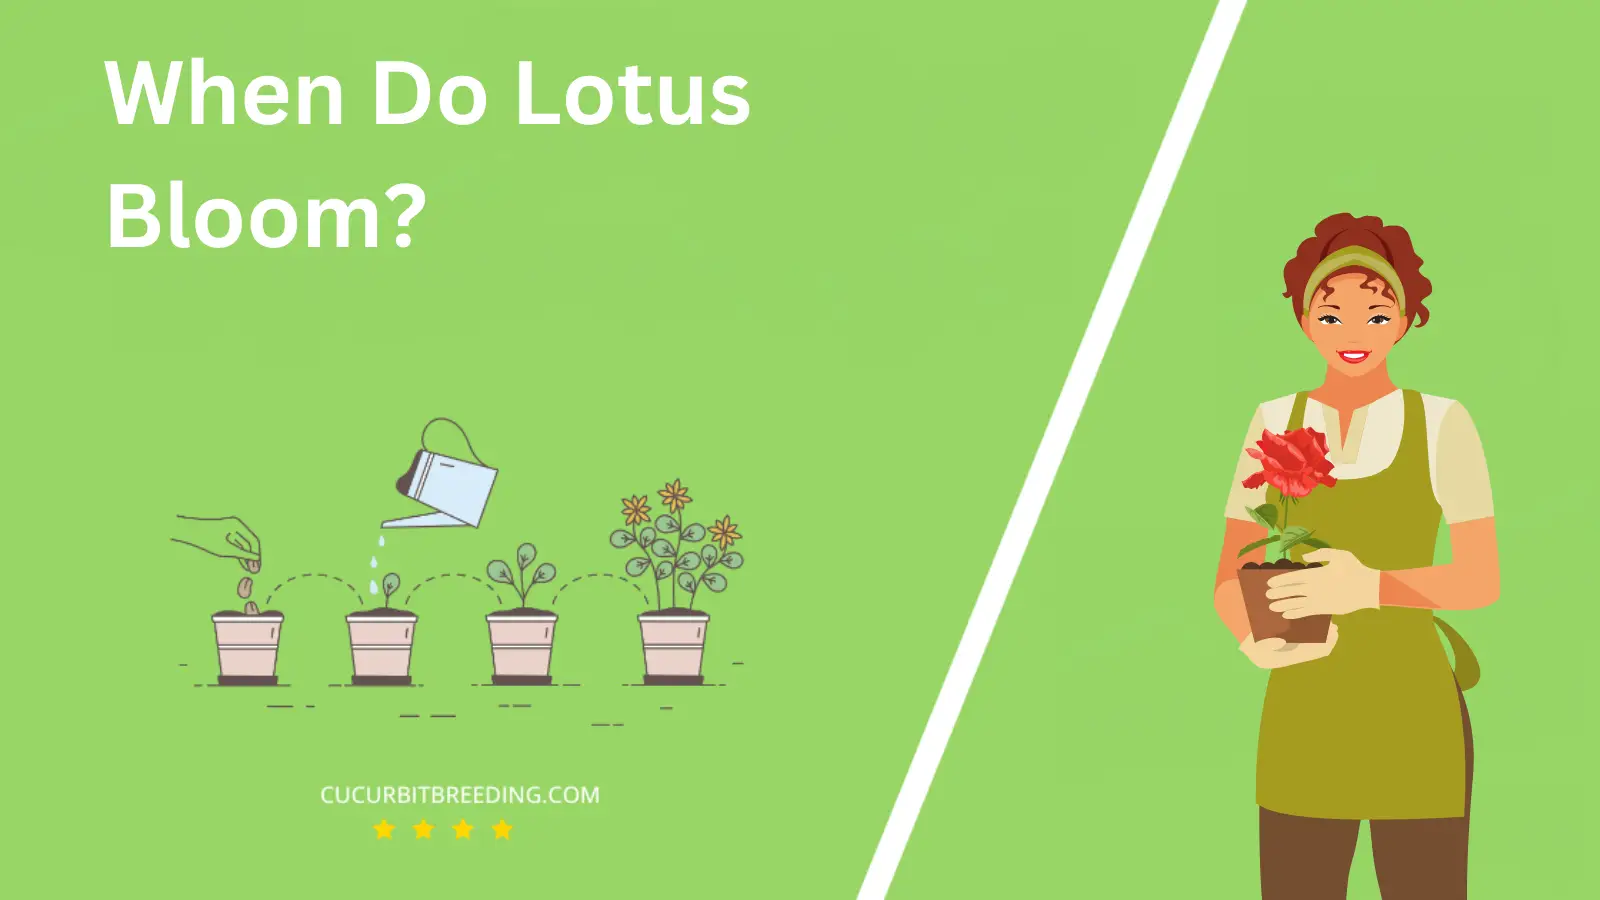 When Do Lotus Bloom?